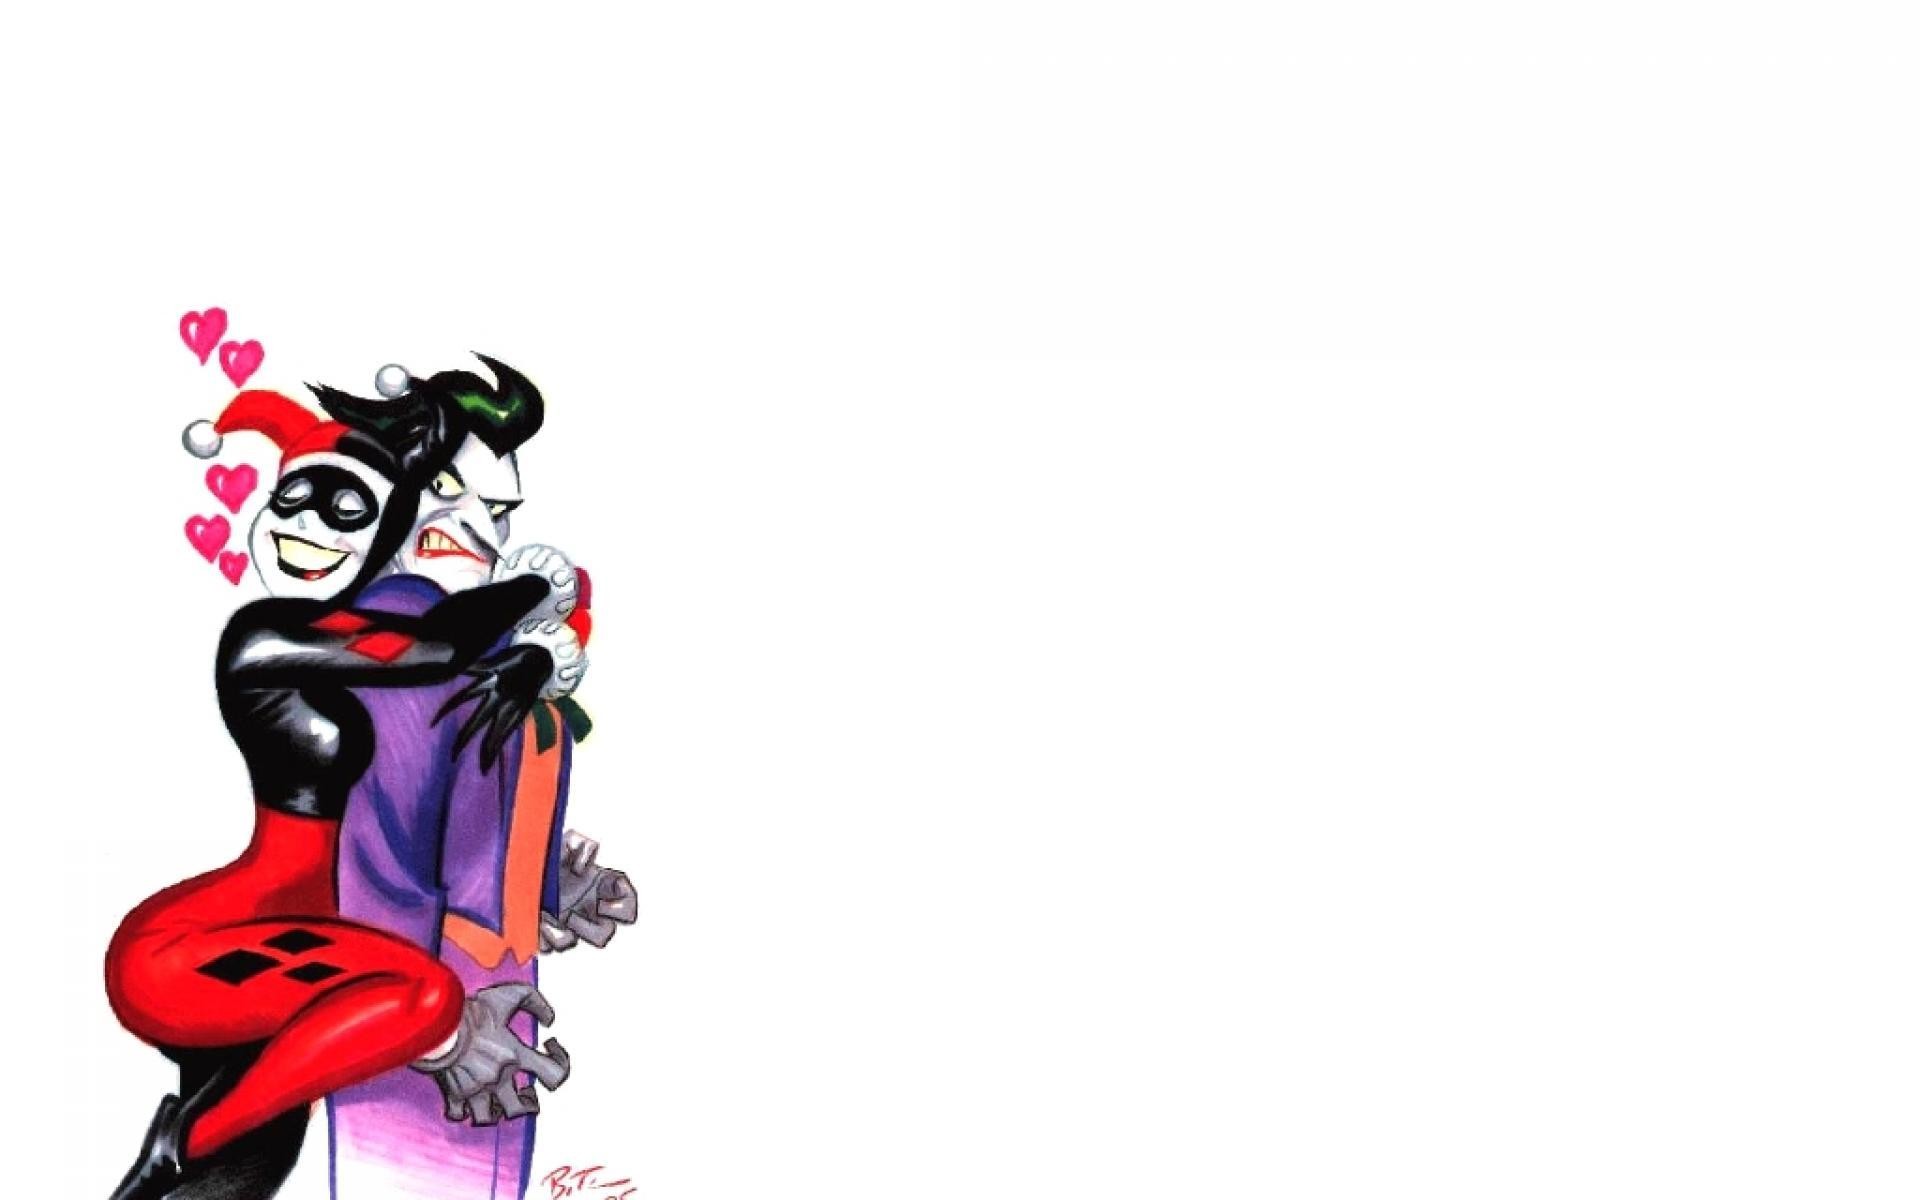 1920x1200 Harley Quinn And Joker Wallpaper Hd Iphone Image Gallery Hcpr